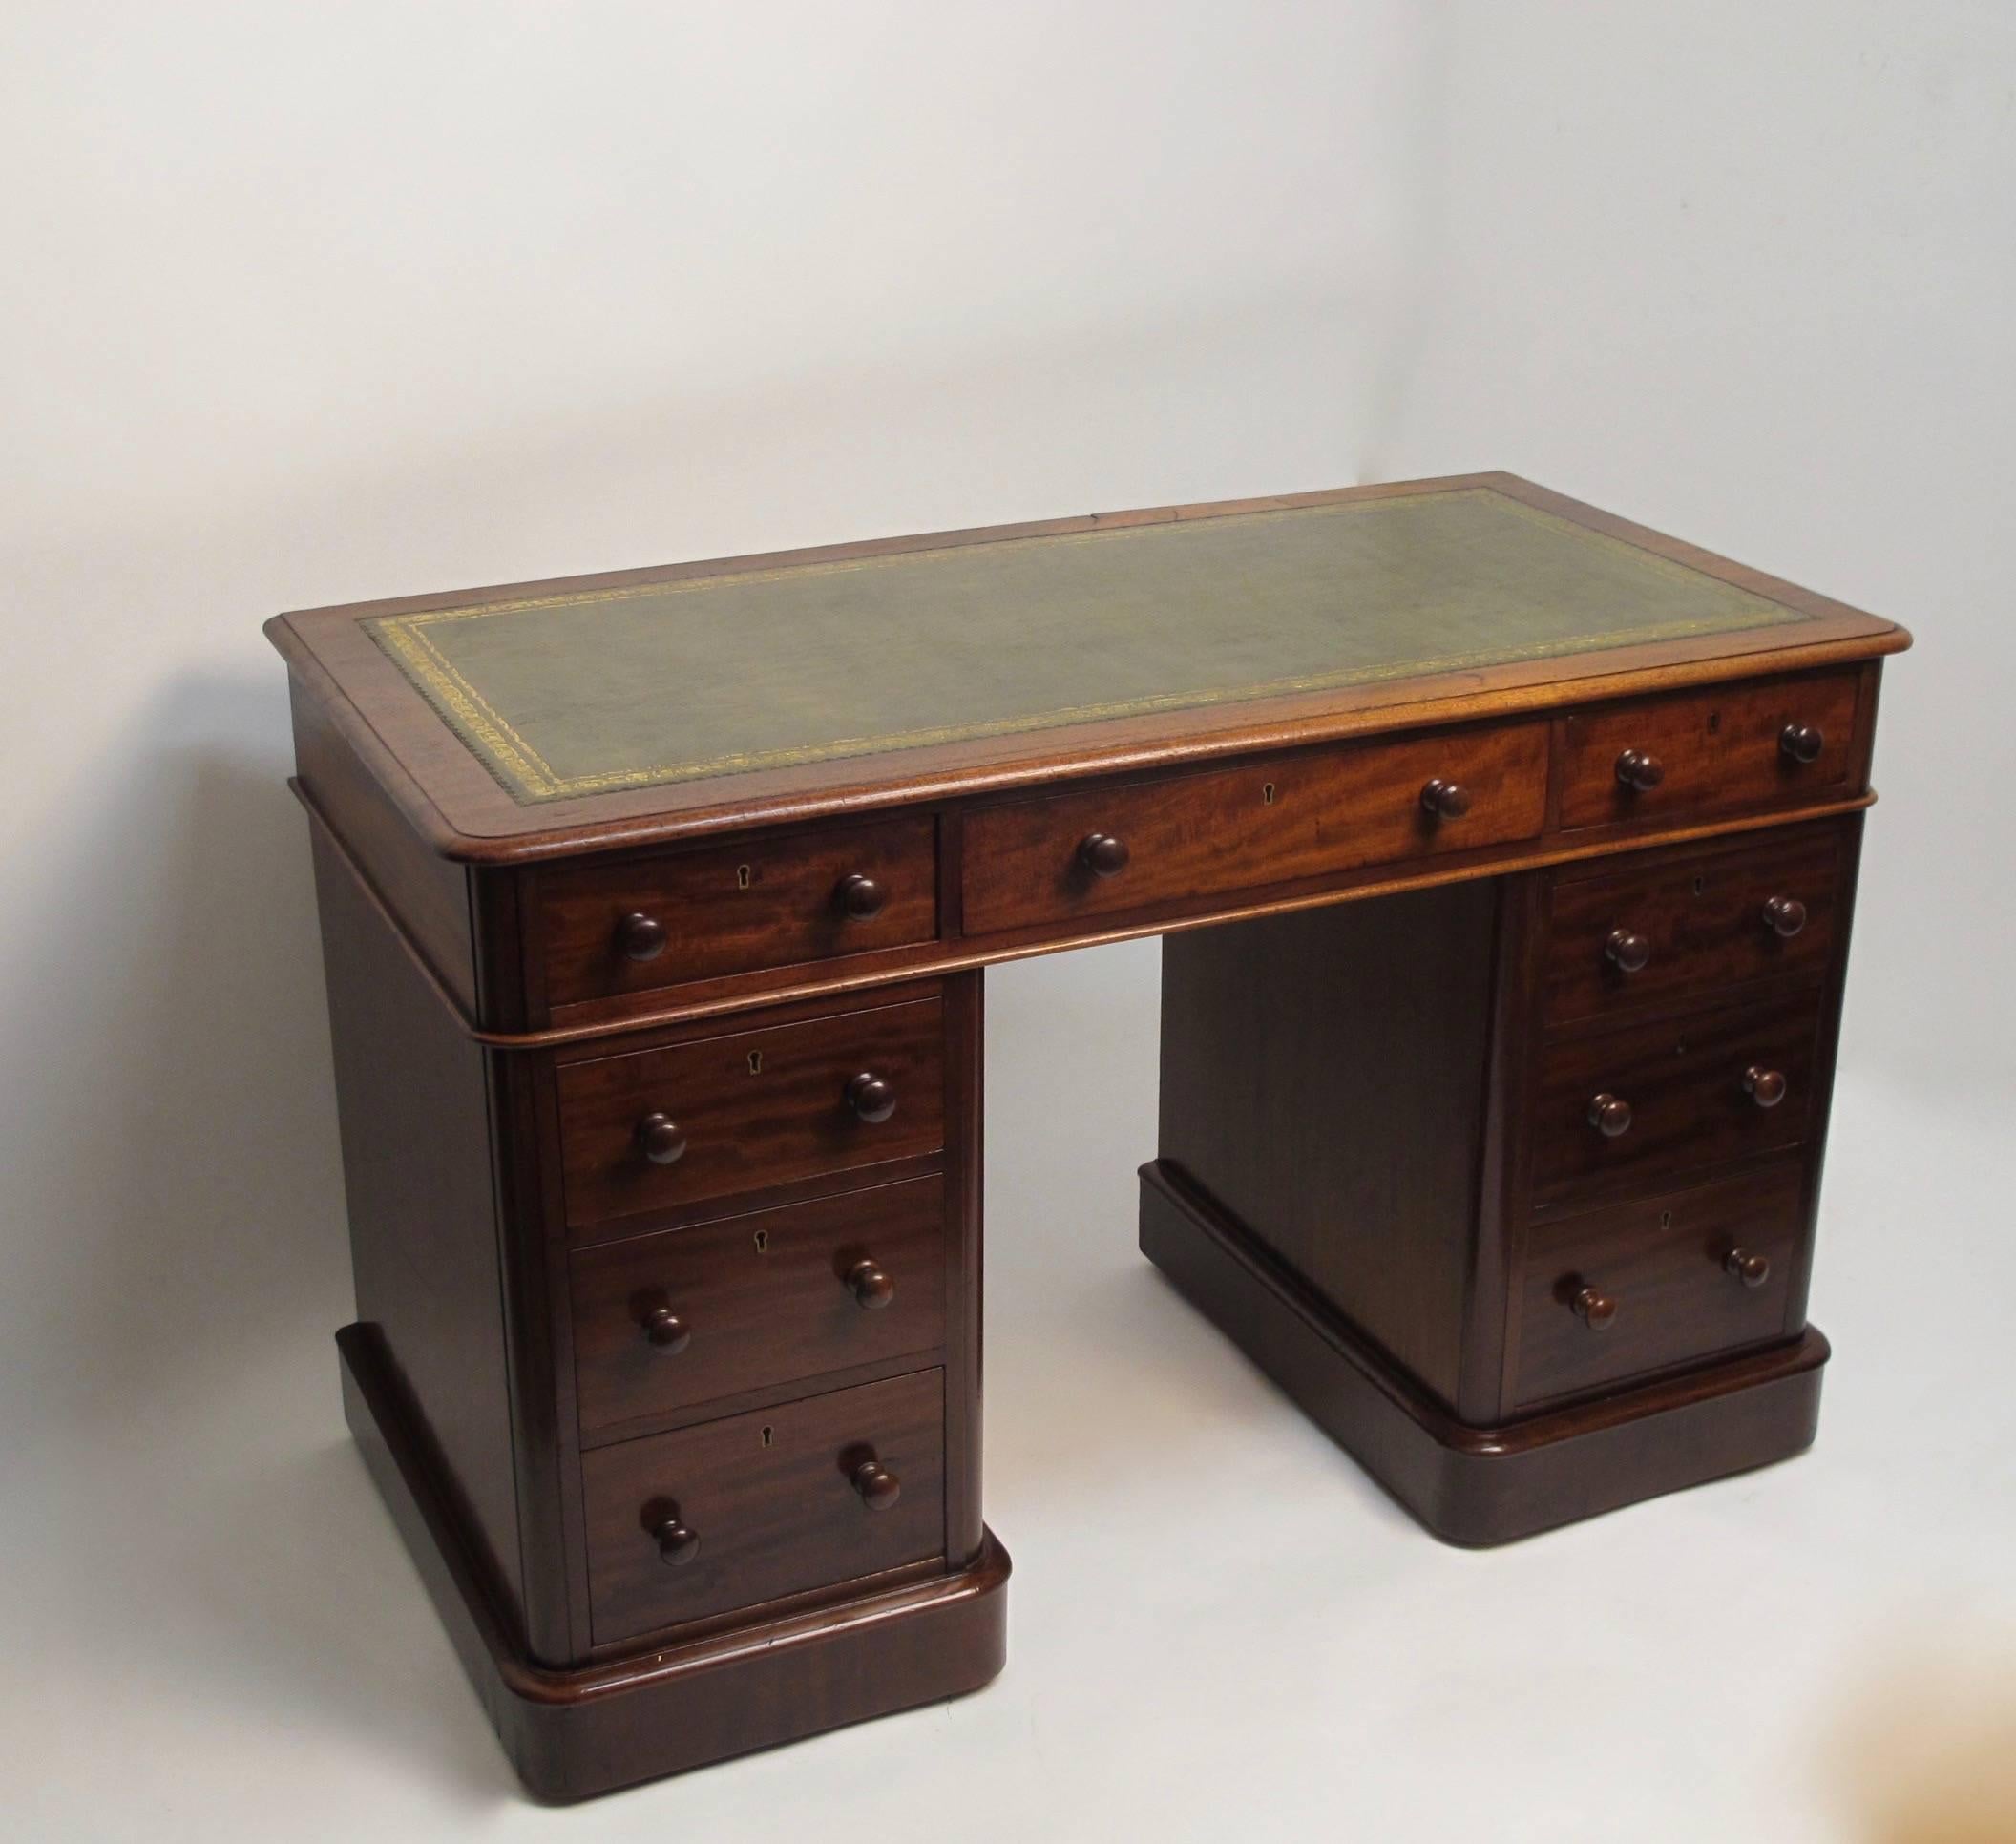 Small scale mahogany double pedestal desk with inset green leather writing surface accented with gold tooling, the pedestals having graduated drawers. English, 19th century, circa 1880.
